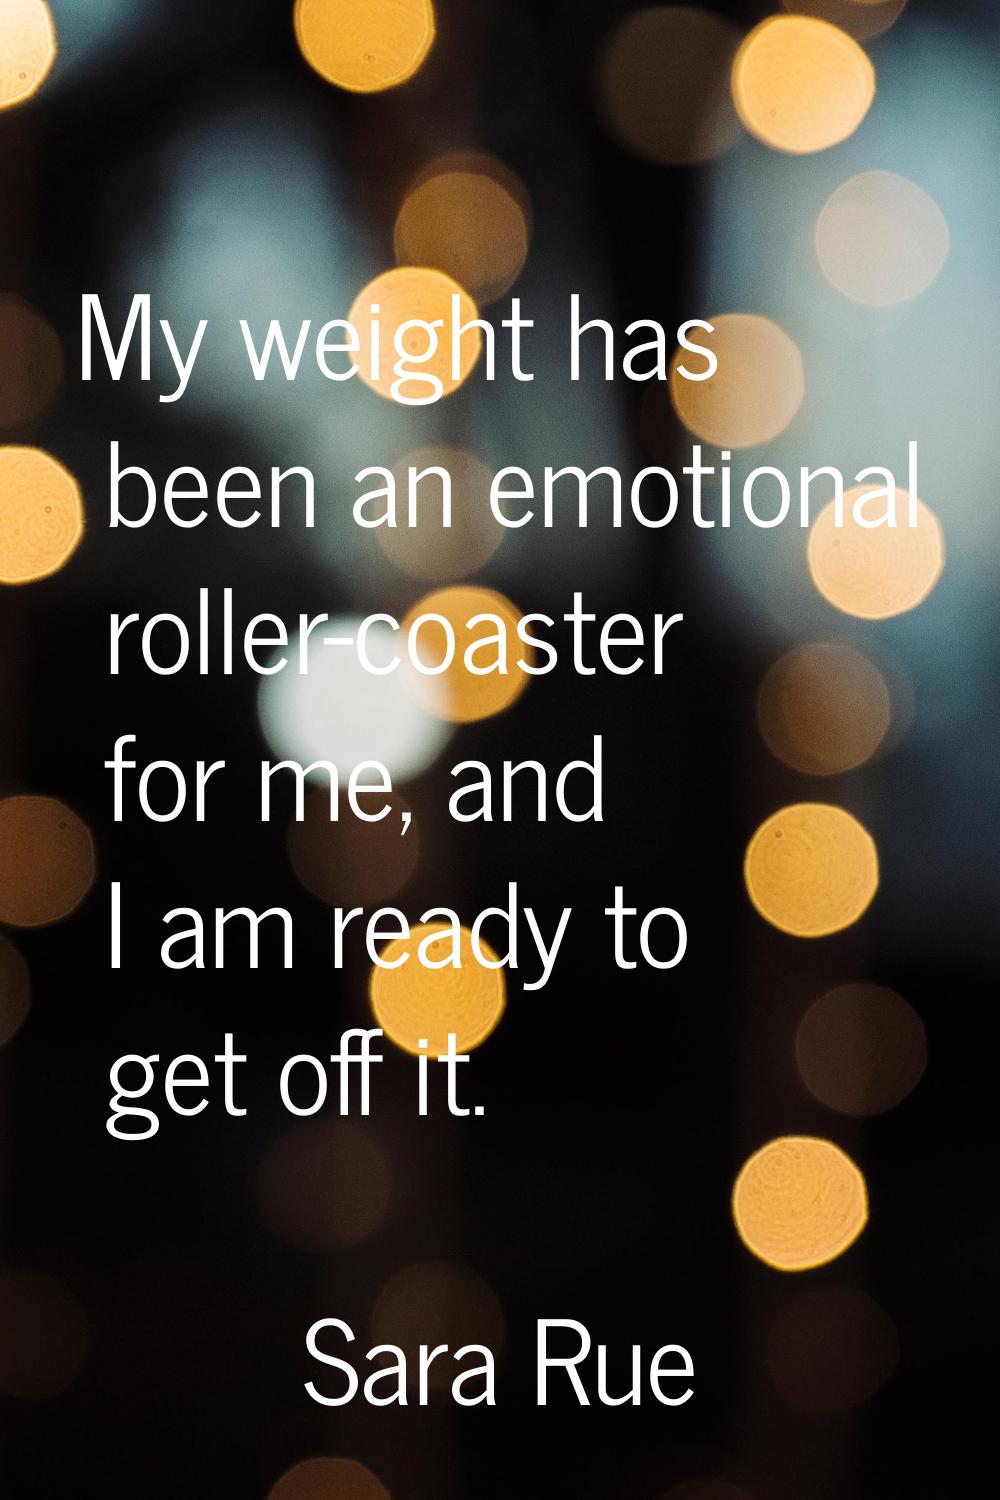 My weight has been an emotional roller-coaster for me, and I am ready to get off it.